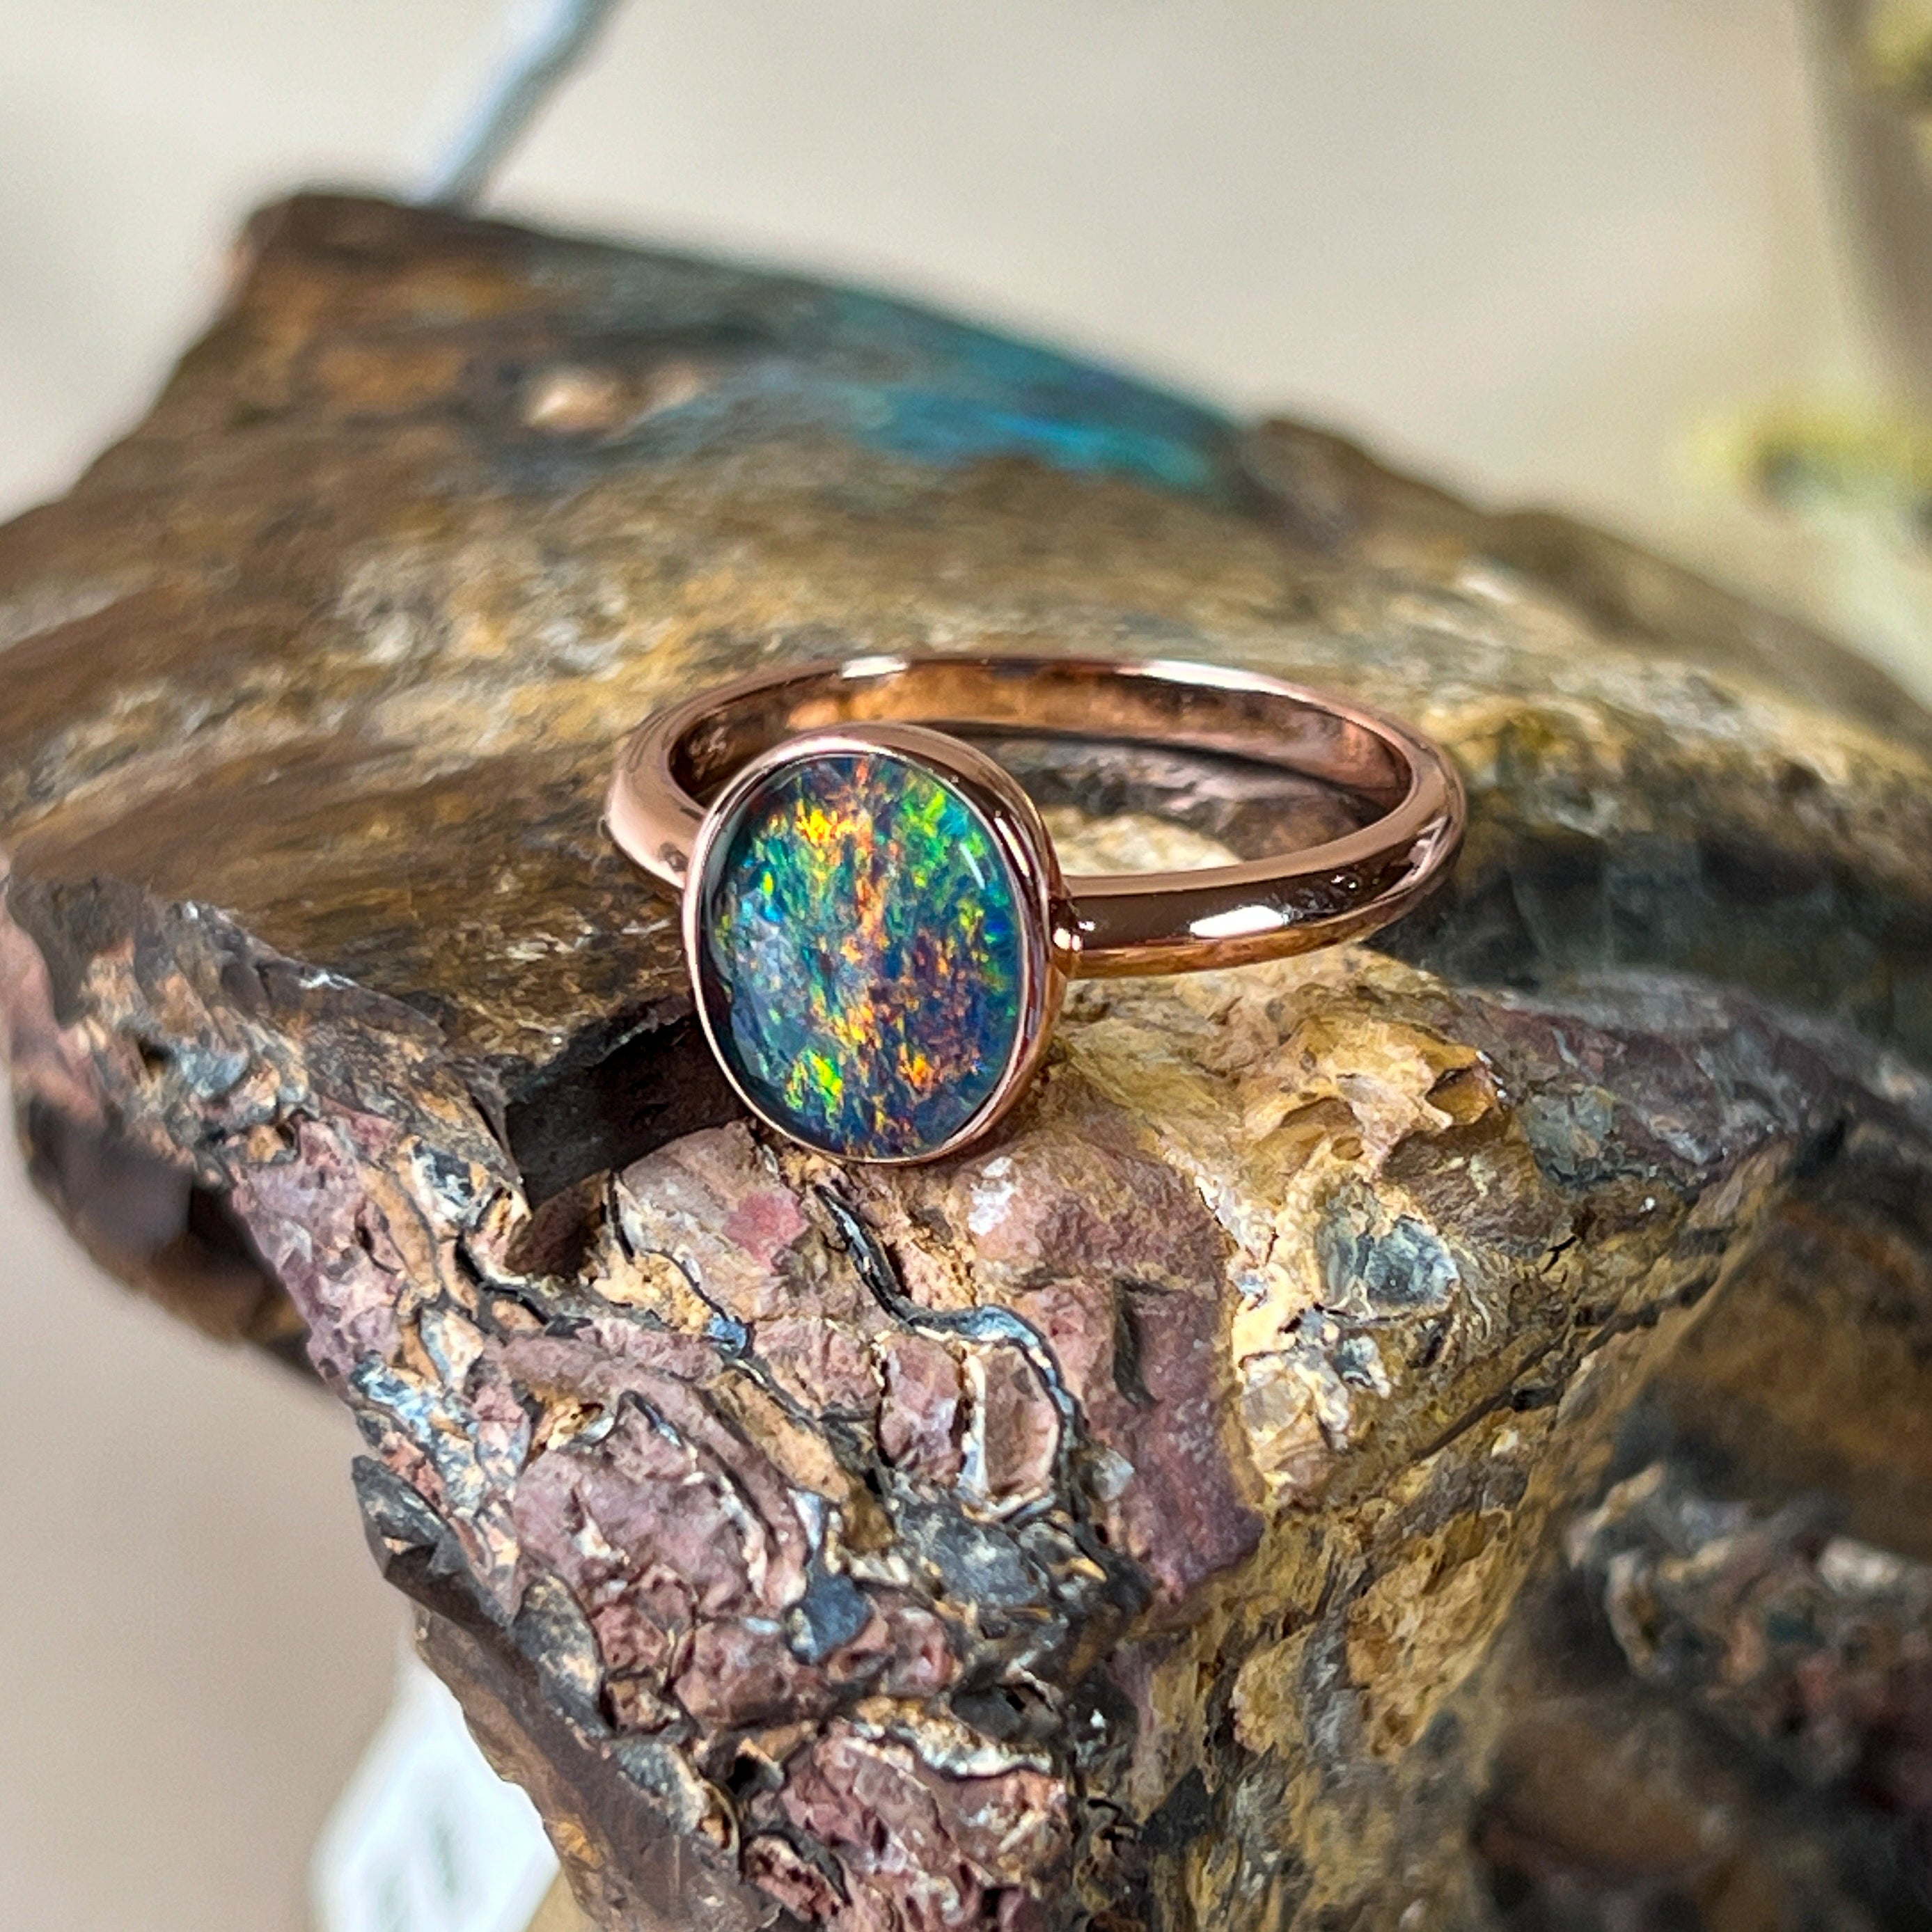 Rose Gold-Plated Sterling Silver Ring - 10x8mm Triplet Opal, Bezel Set, Minimalist Jewelry, Perfect Gift for Her, Opal Ring - Masterpiece Jewellery Opal & Gems Sydney Australia | Online Shop